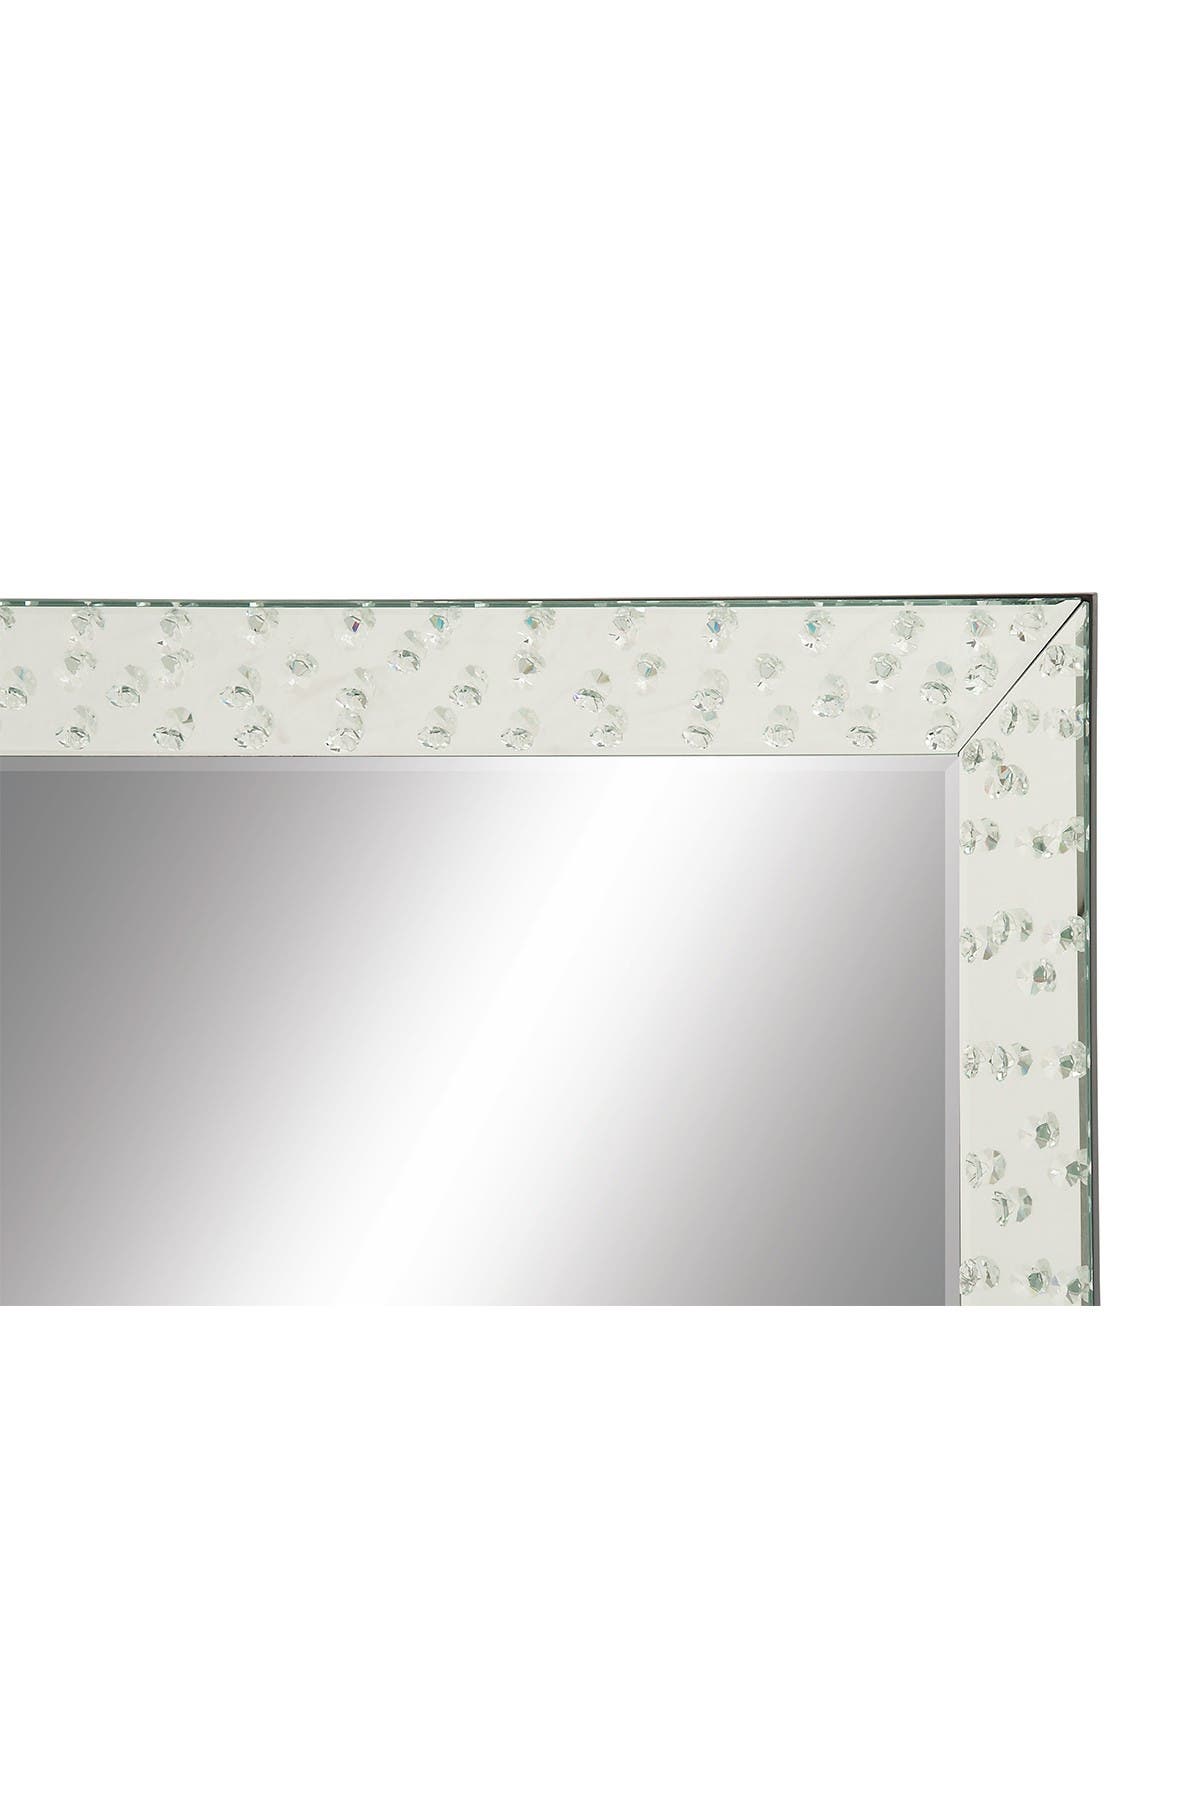 Willow Row Reflective Mirror/clear Glass Modern Glass Framed Wall Mirror